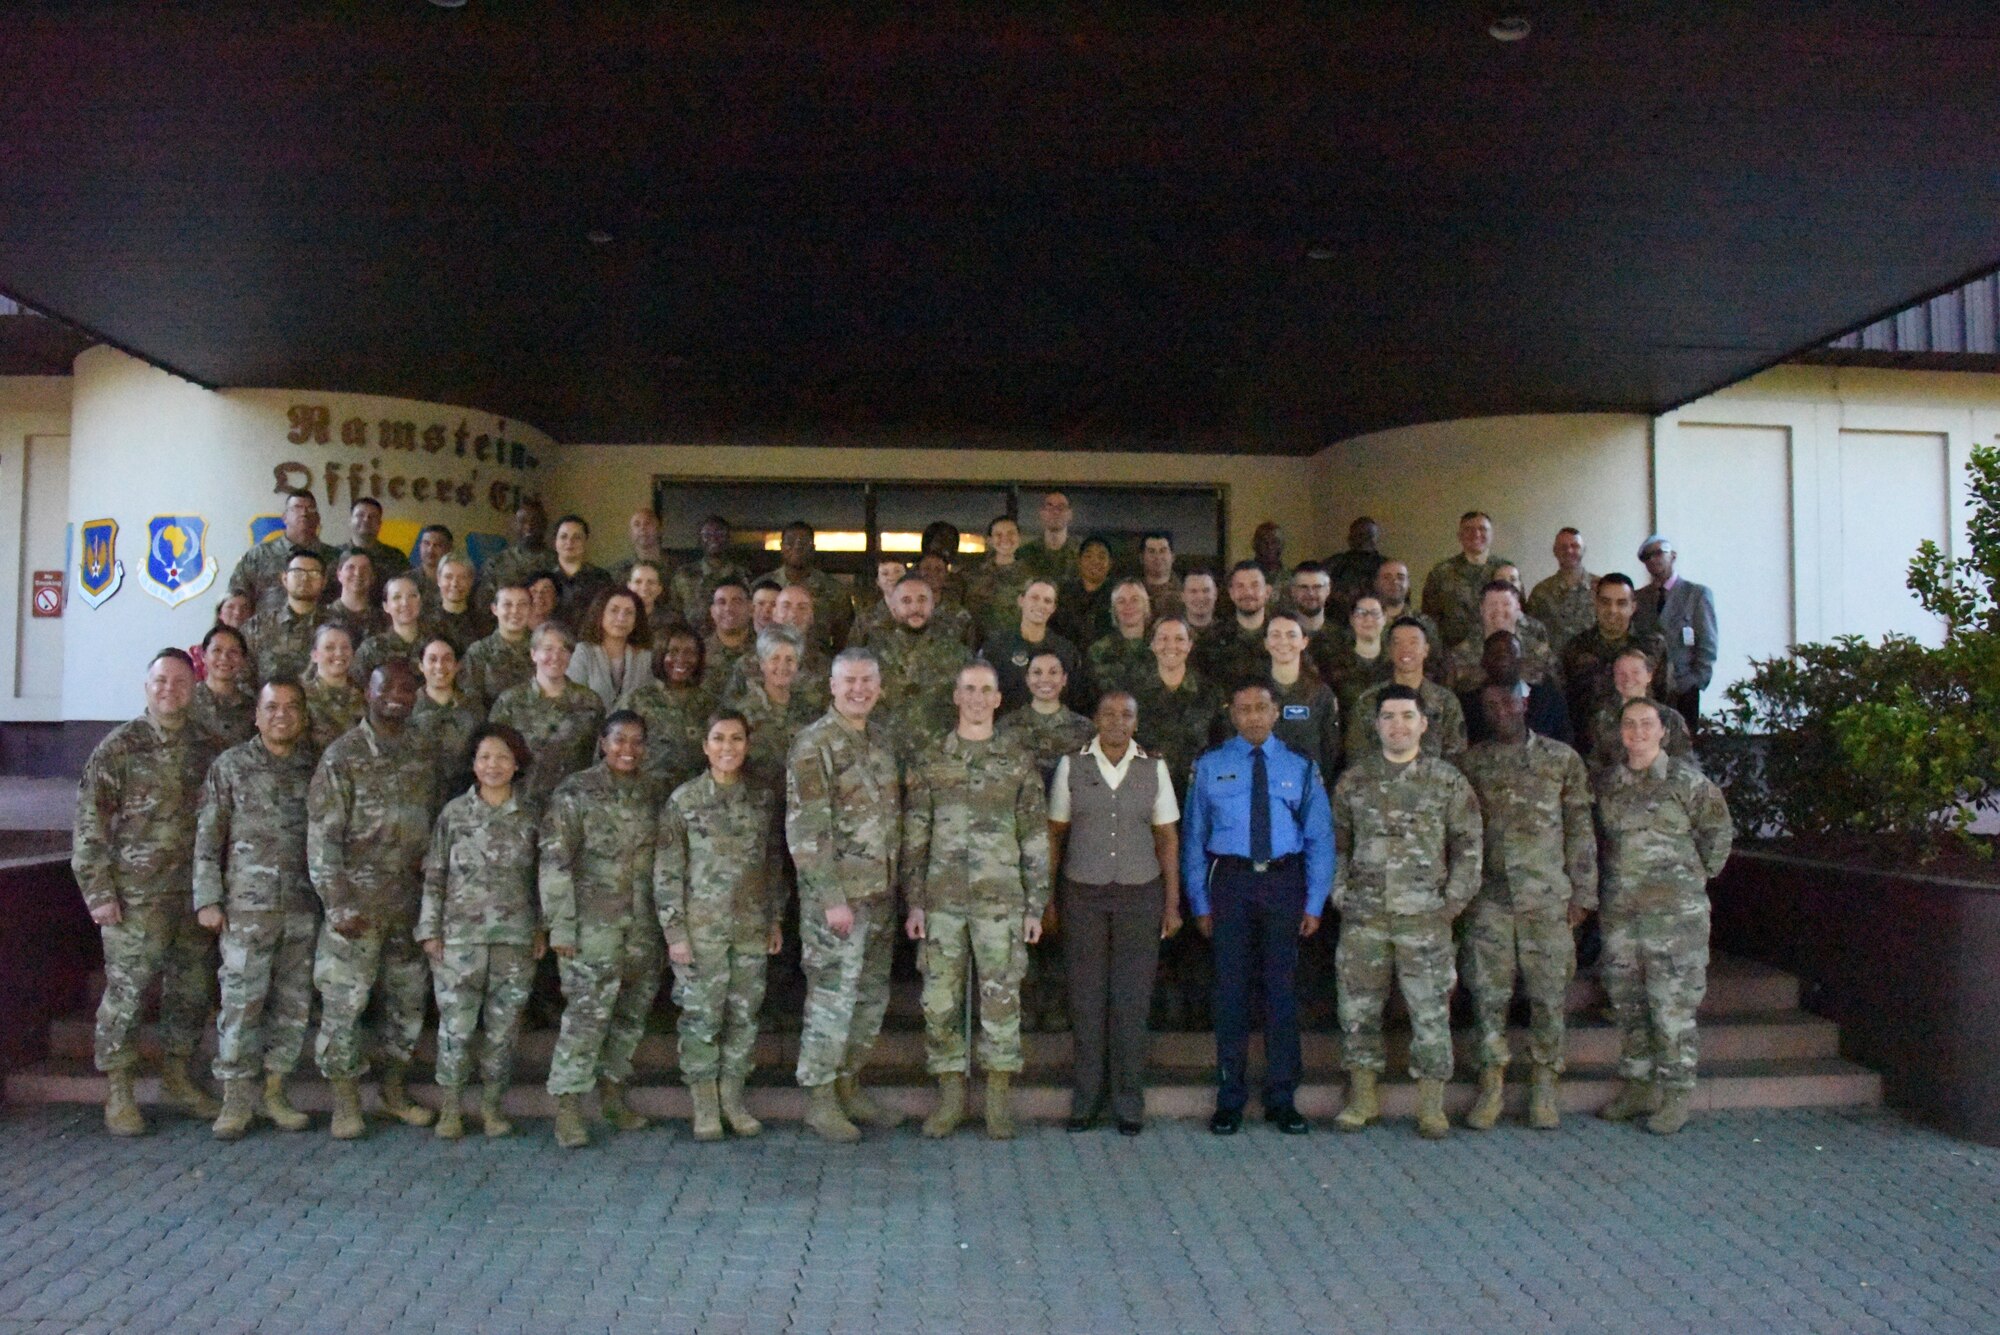 Airmen, Soldiers, and foreign delegates from Botswana, Czech Republic, Estonia, Germany, Mauritius, Morocco, Nigeria, North Macedonia, Romania, Slovenia, South Africa, and Tanzania pose for a group picture during U.S. Air Forces in Europe - Air Forces Africa’s European-African Military Nursing Exchange conference at Ramstein Air Base, Germany, May 9, 2022.